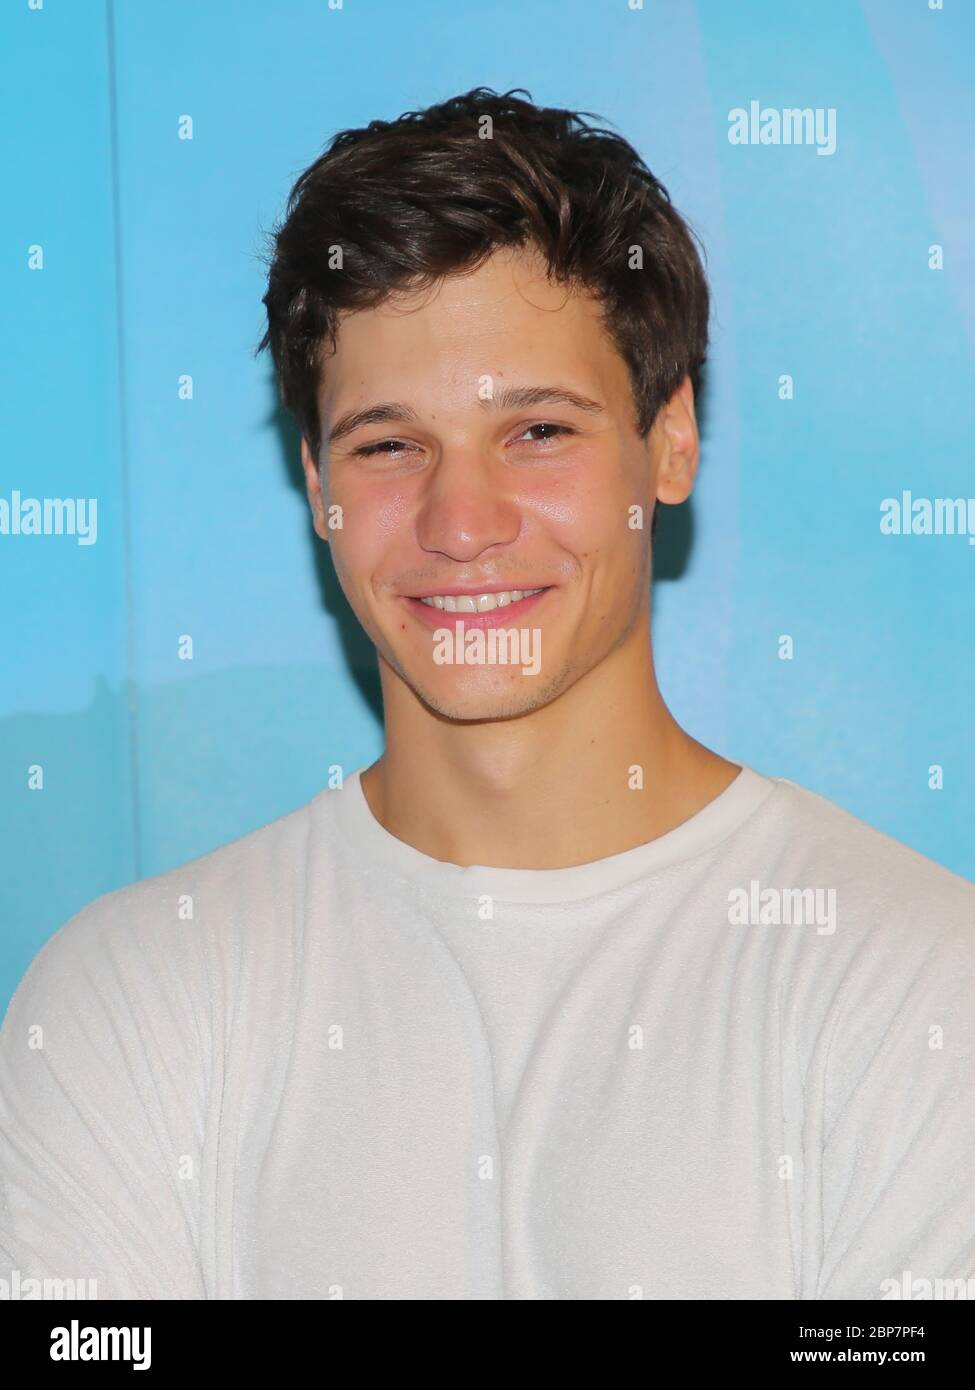 German pop singer and songwriter Wincent Weiss at Stars for Free 2019 in Magdeburg Stock Photo